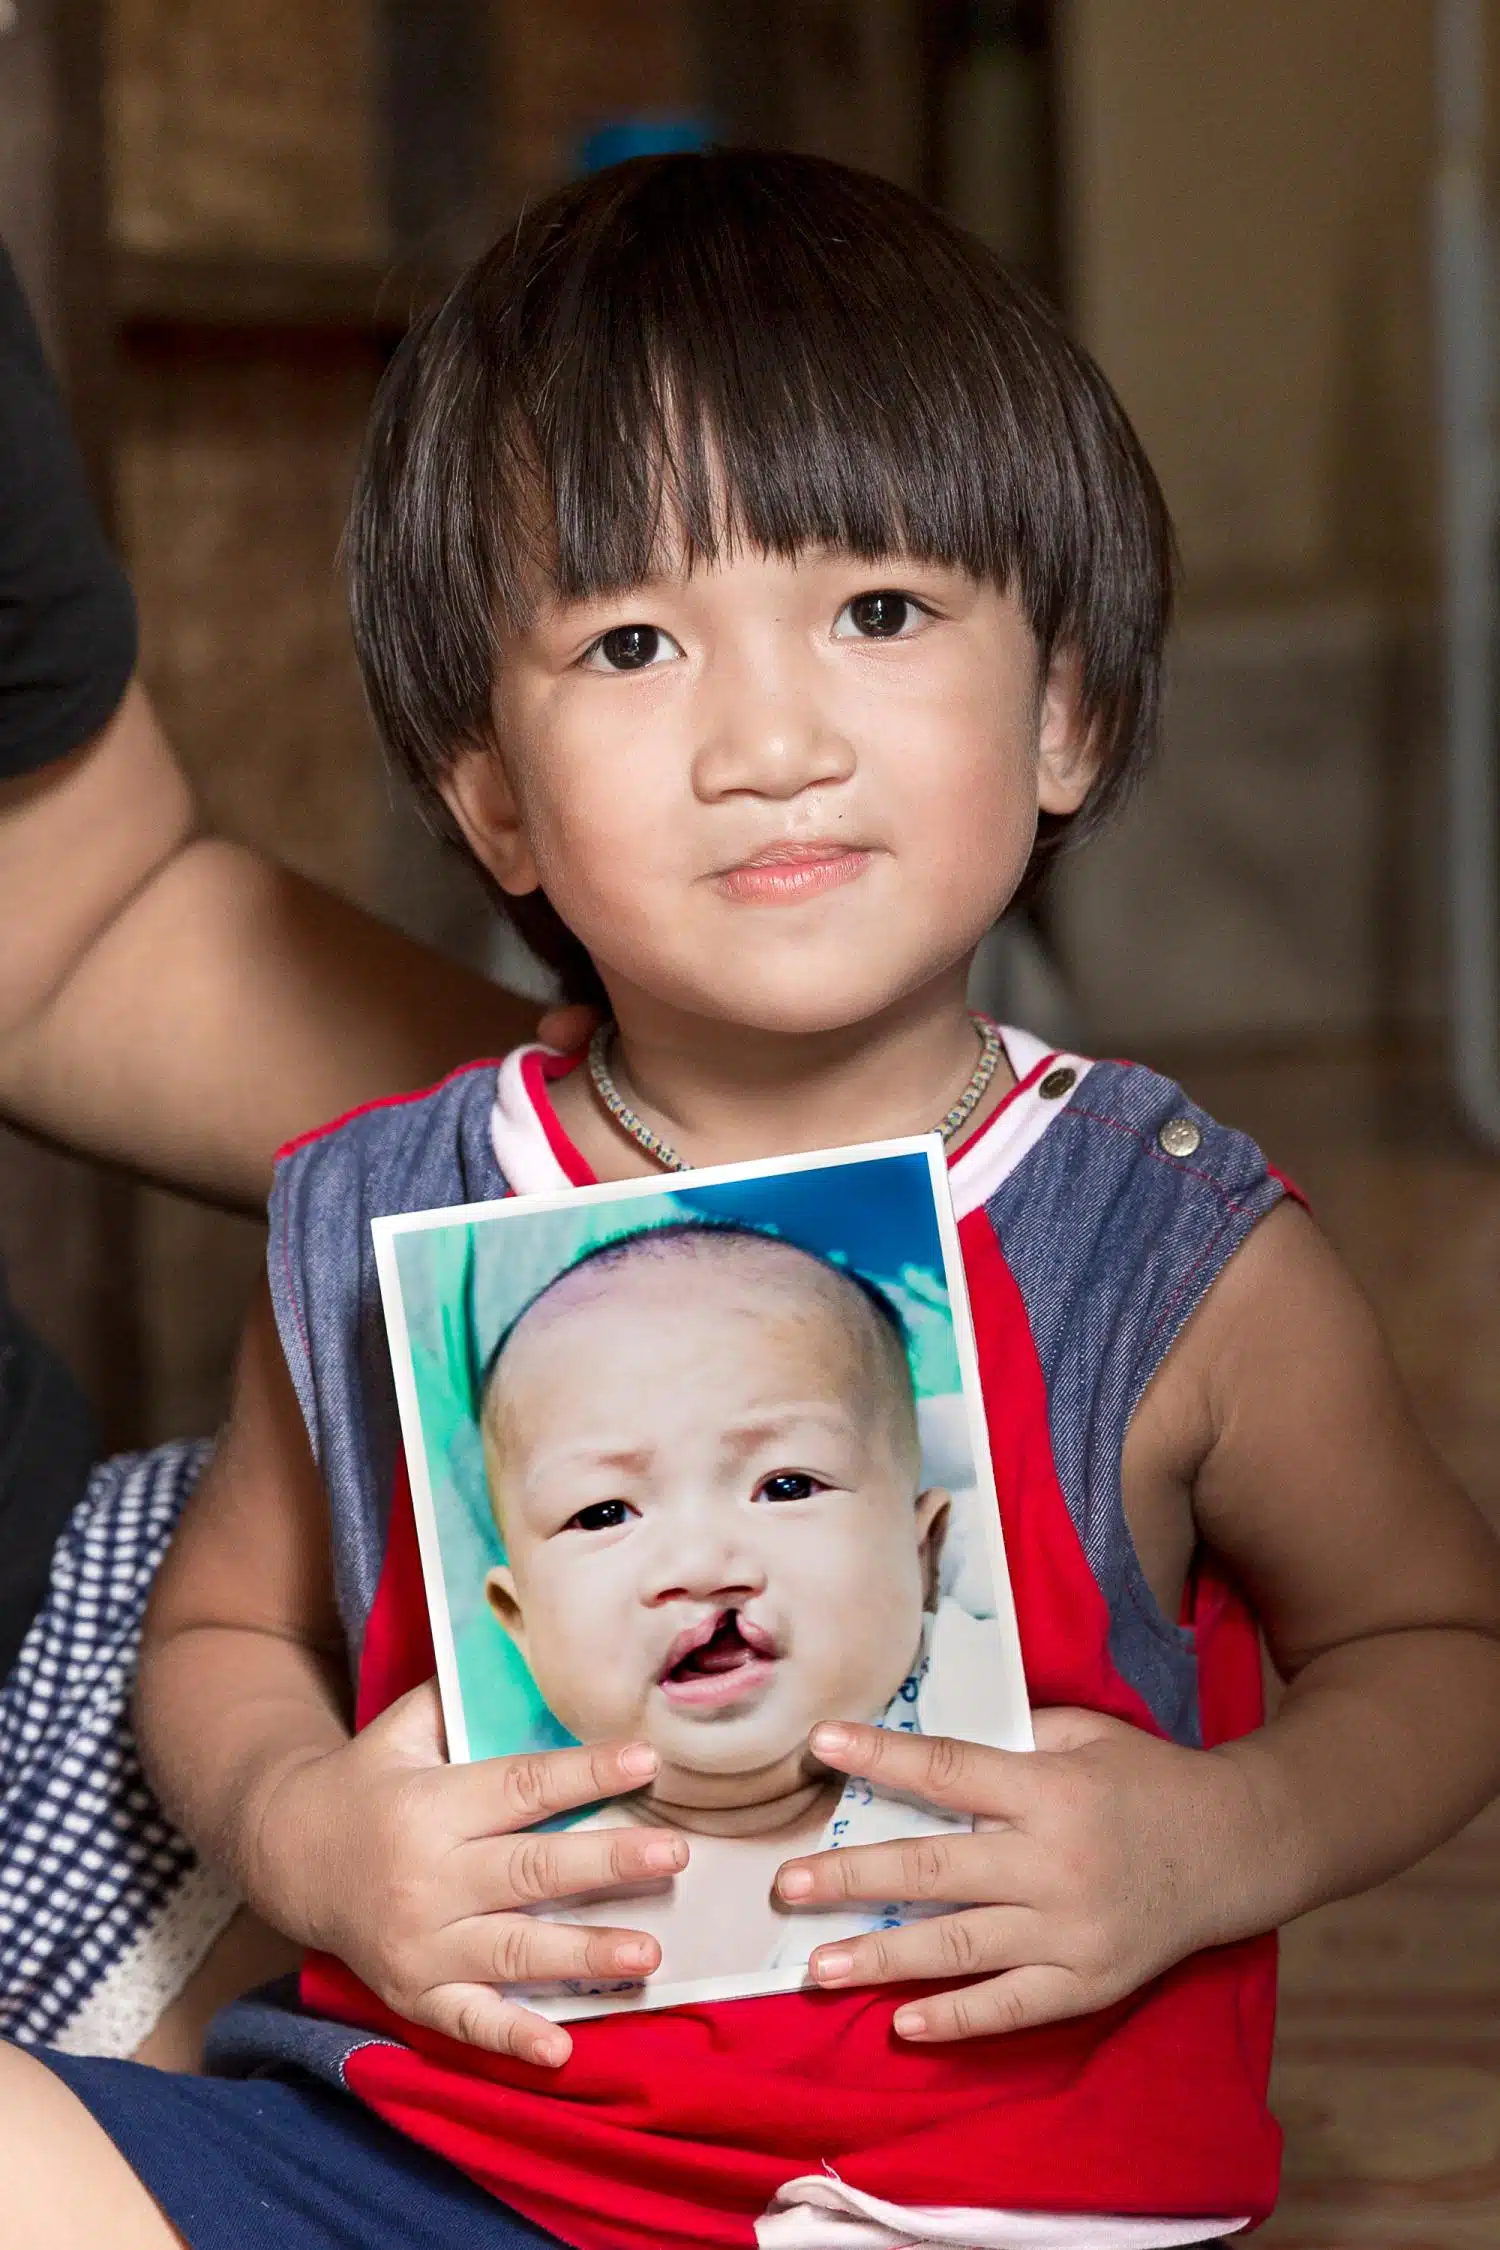 An Operation Smile patient posing with a photo of himself before cleft surgery